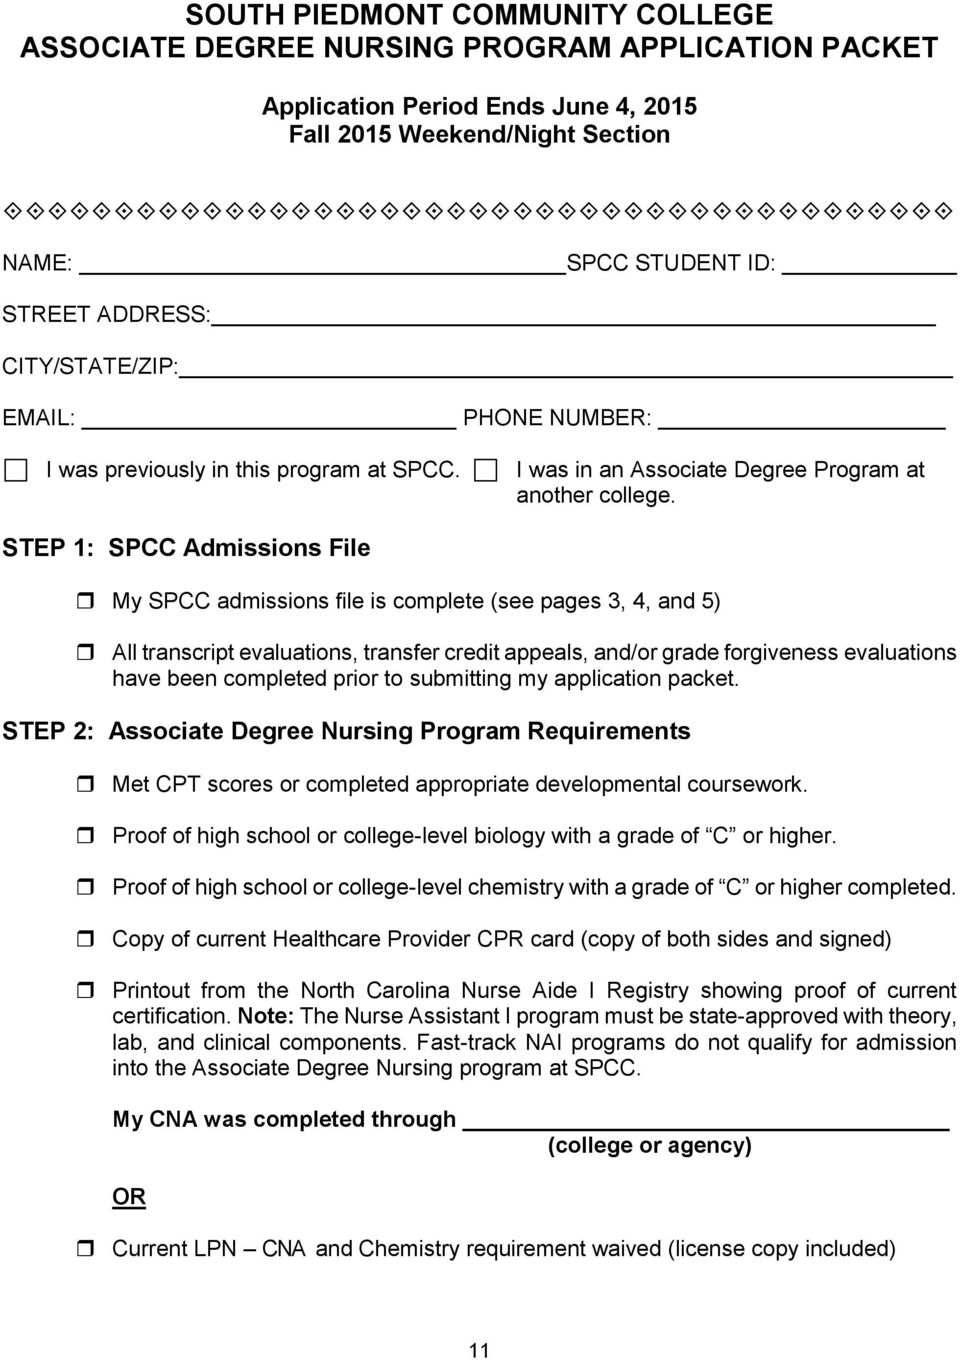 STEP 1: SPCC Admissions File My SPCC admissions file is complete (see pages 3, 4, and 5) All transcript evaluations, transfer credit appeals, and/or grade forgiveness evaluations have been completed